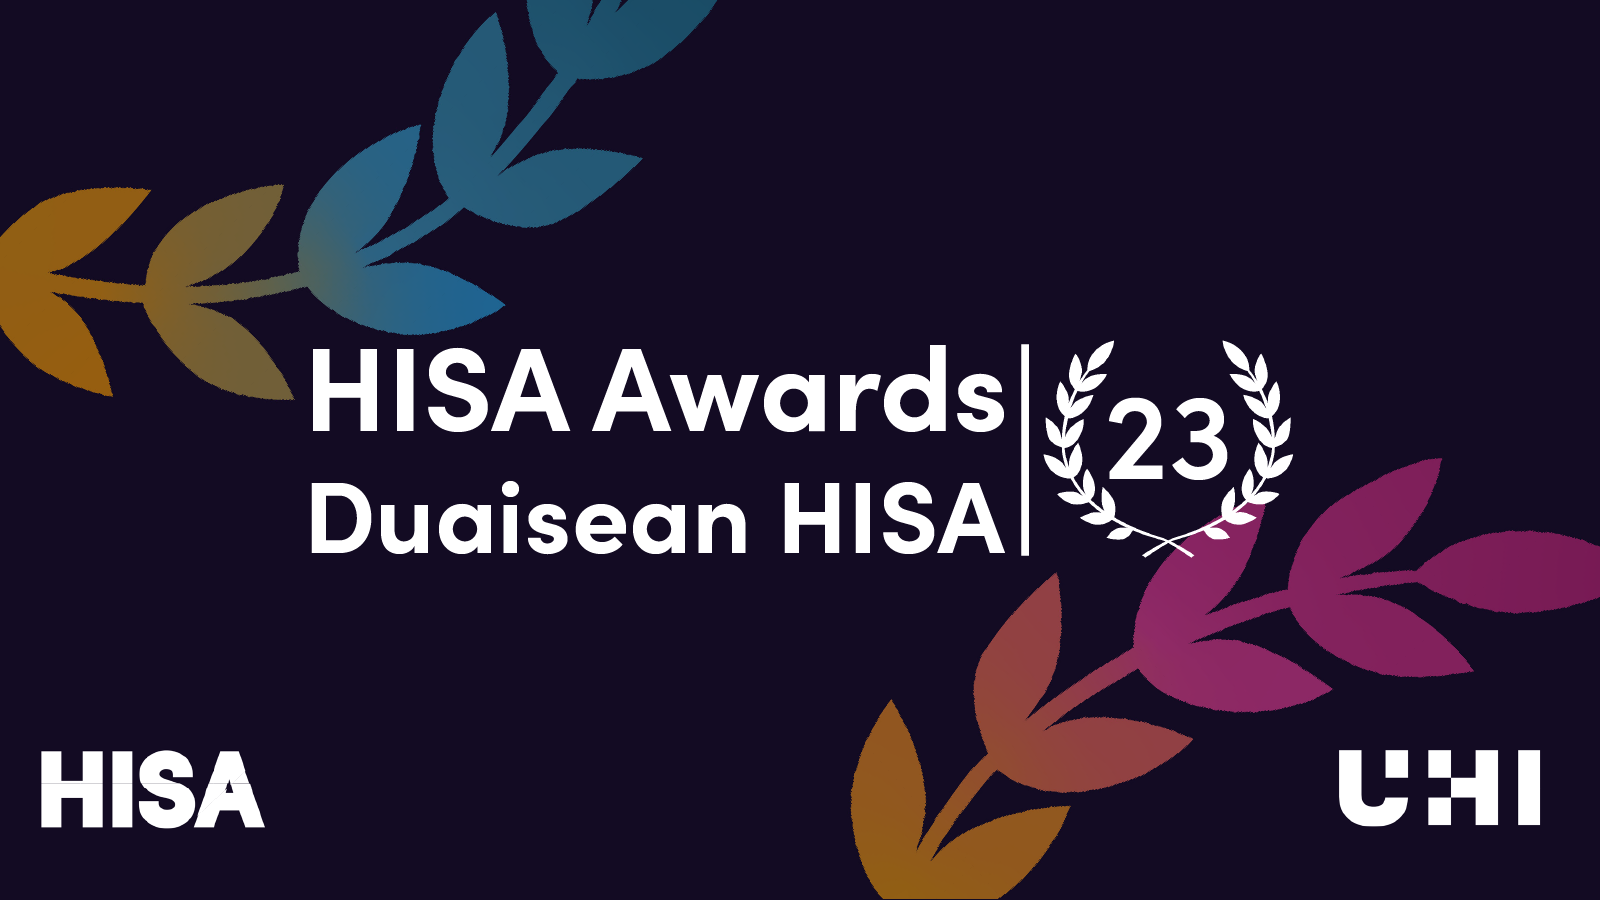 UHI staff and students recognised in HISA awards 